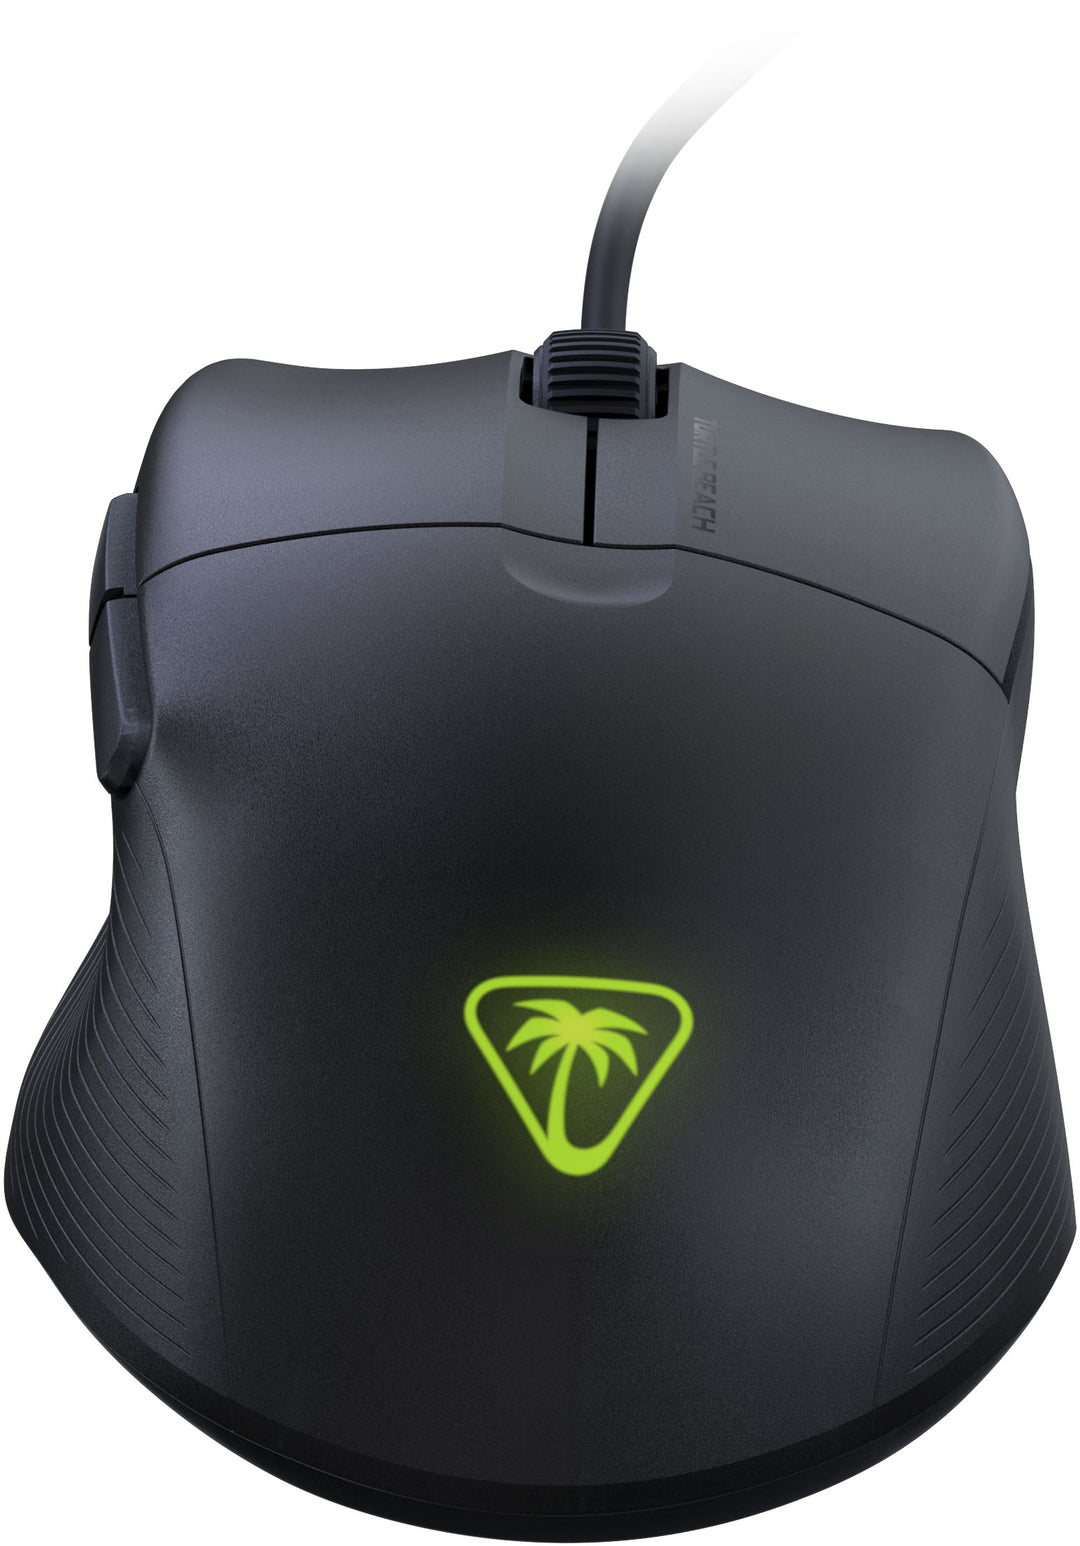 Turtle Beach - Pure SEL Ultra-Light Wired Ergonomic RGB Gaming Mouse with 8K DPI Optical Sensor & Mechanical Switches - Black_11